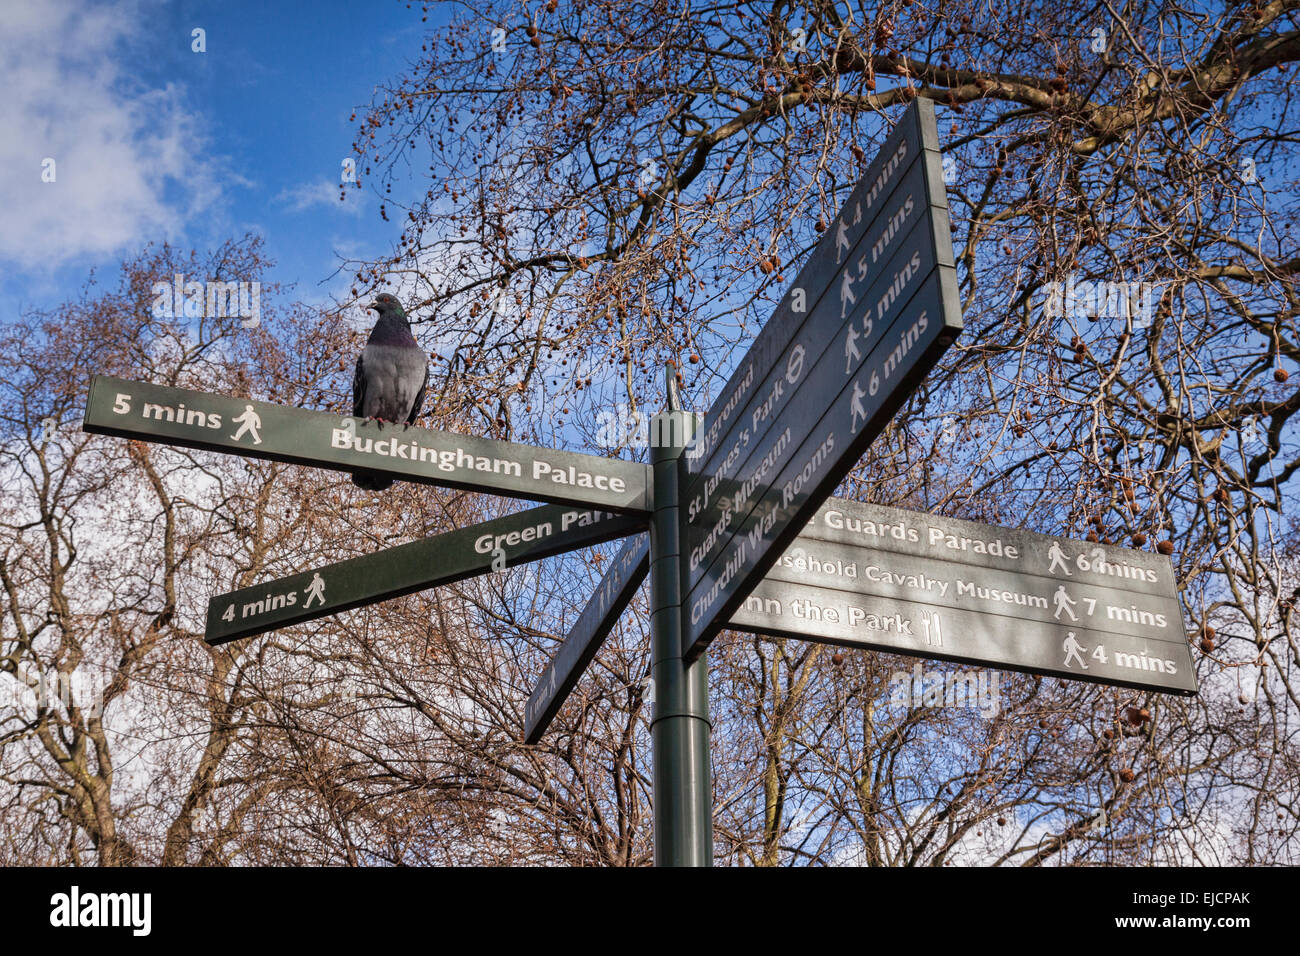 Pigeon perched on sign for Buckingham Palace, London, winter. Stock Photo